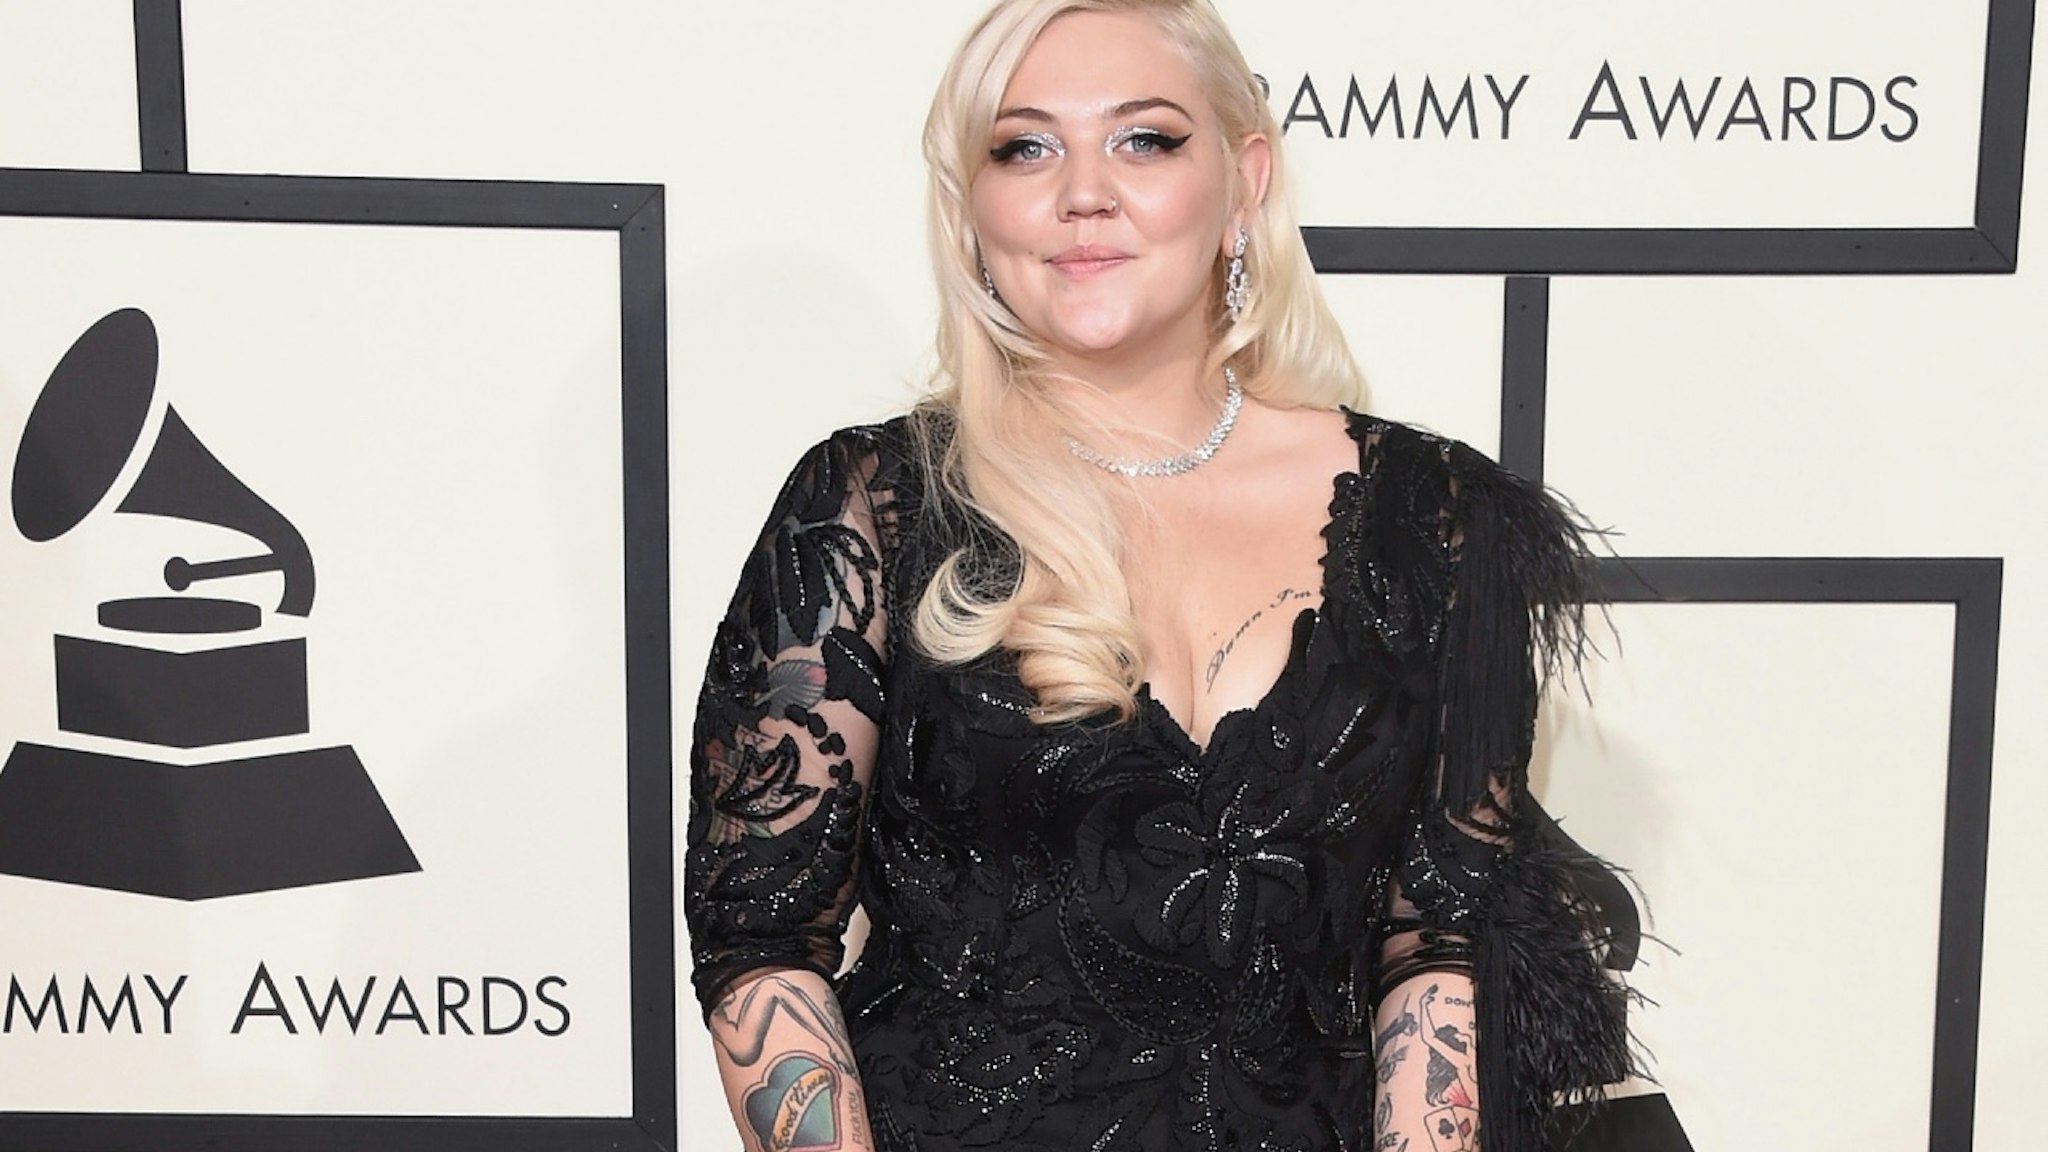 Singer Elle King attends The 58th GRAMMY Awards at Staples Center on February 15, 2016 in Los Angeles, California.